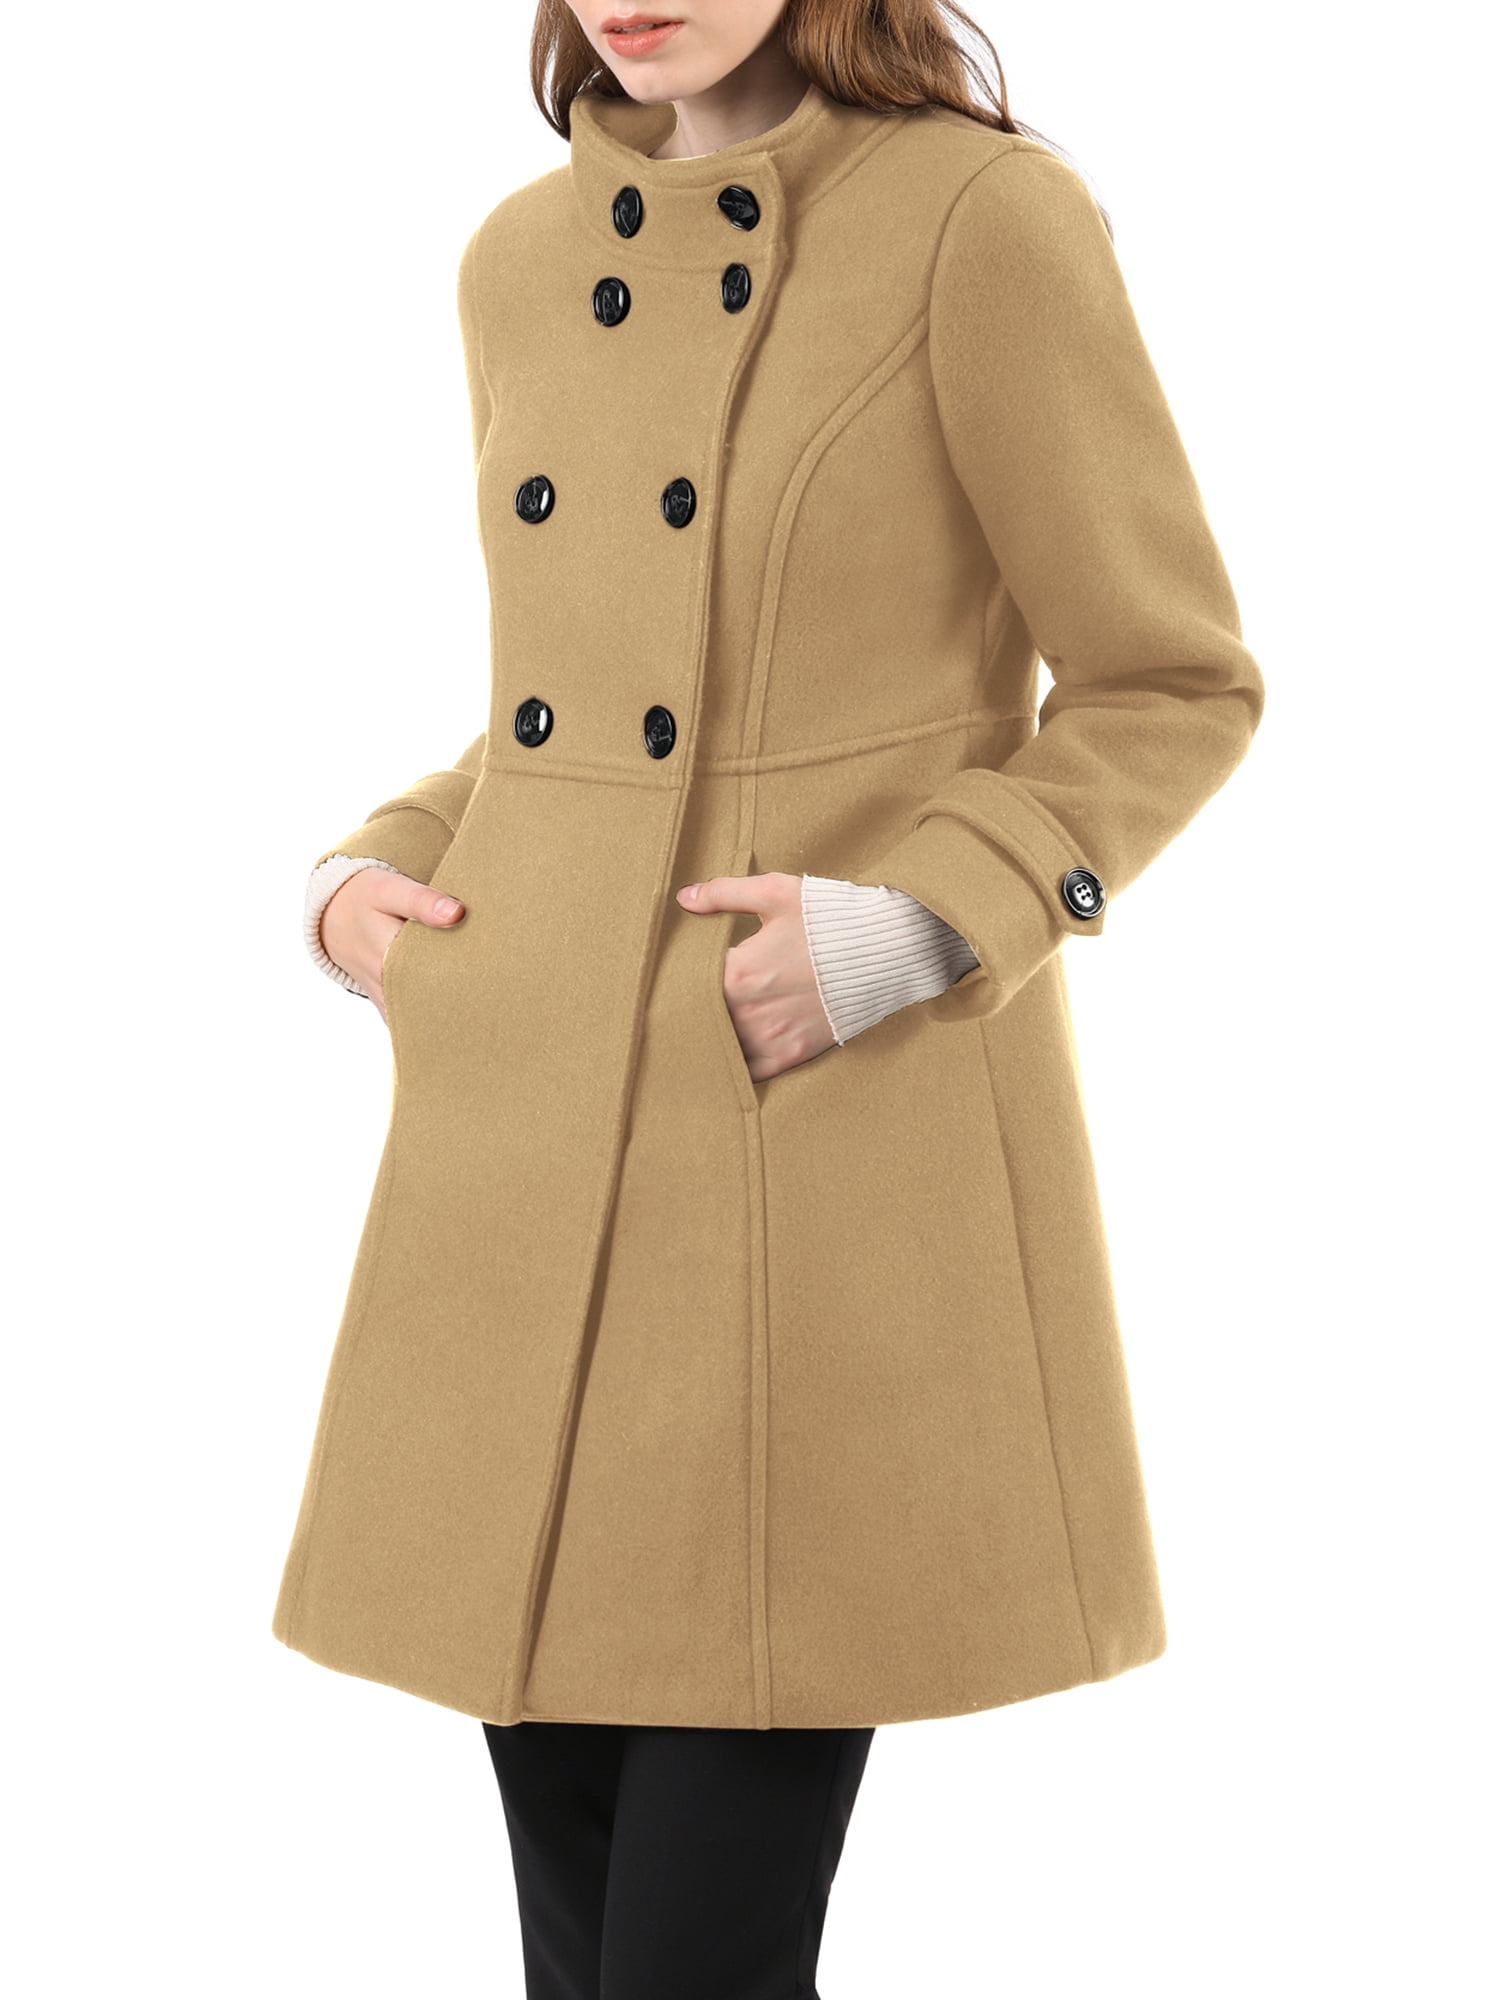 Allegra K Womens Tie Waist Single Breasted Long Sleeves Faux Suede Trench Coat 